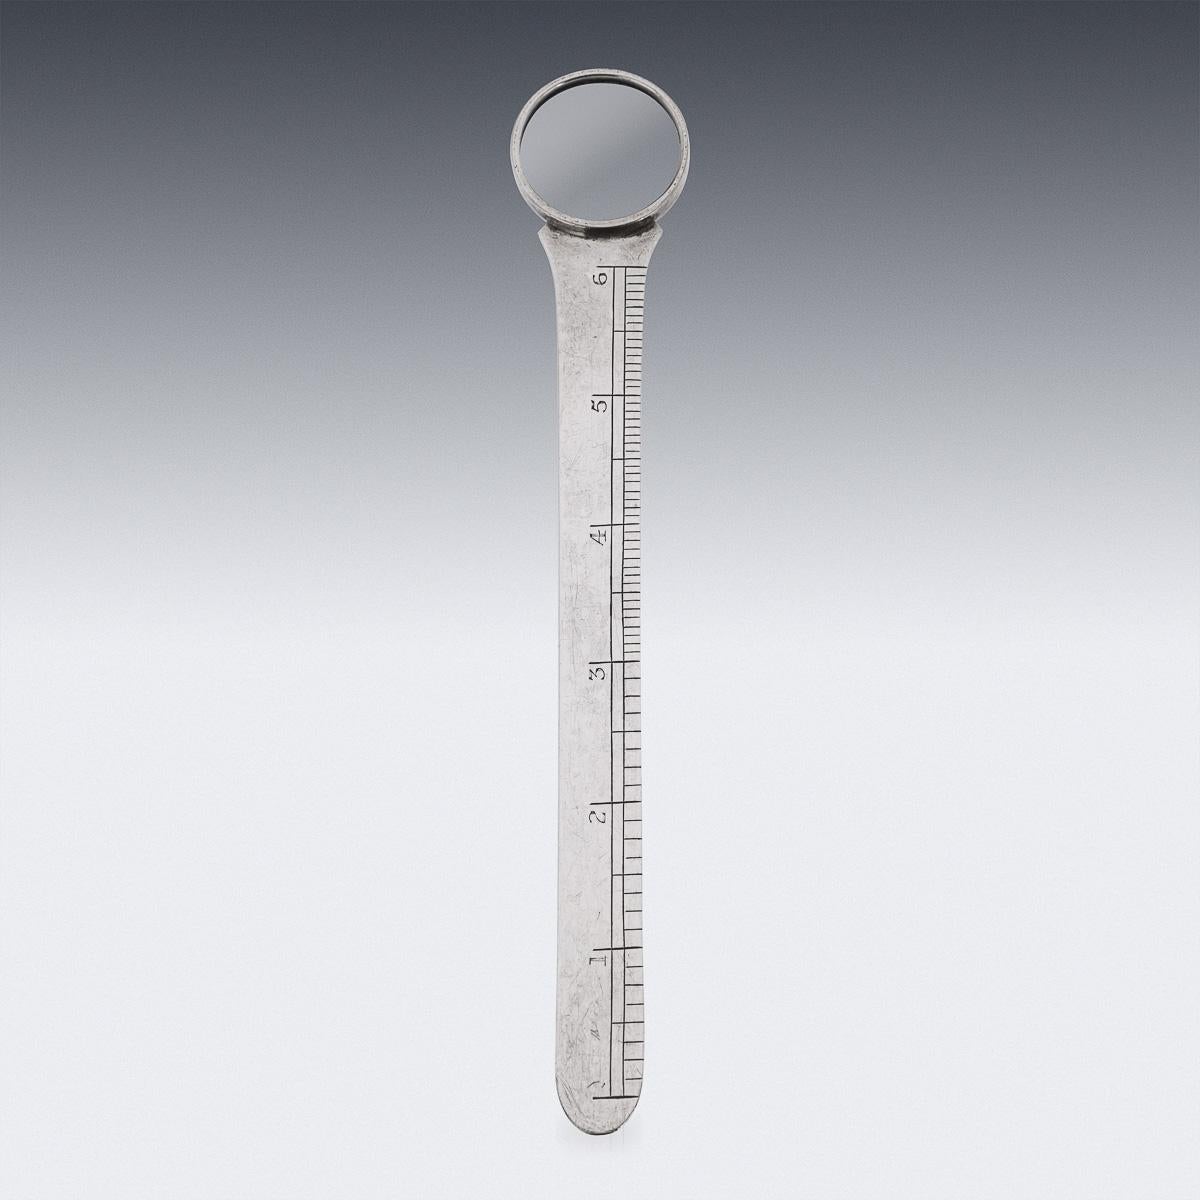 English 20th Century British Solid Silver Magnifying Glass & Ruler, Asprey, c.1929 For Sale